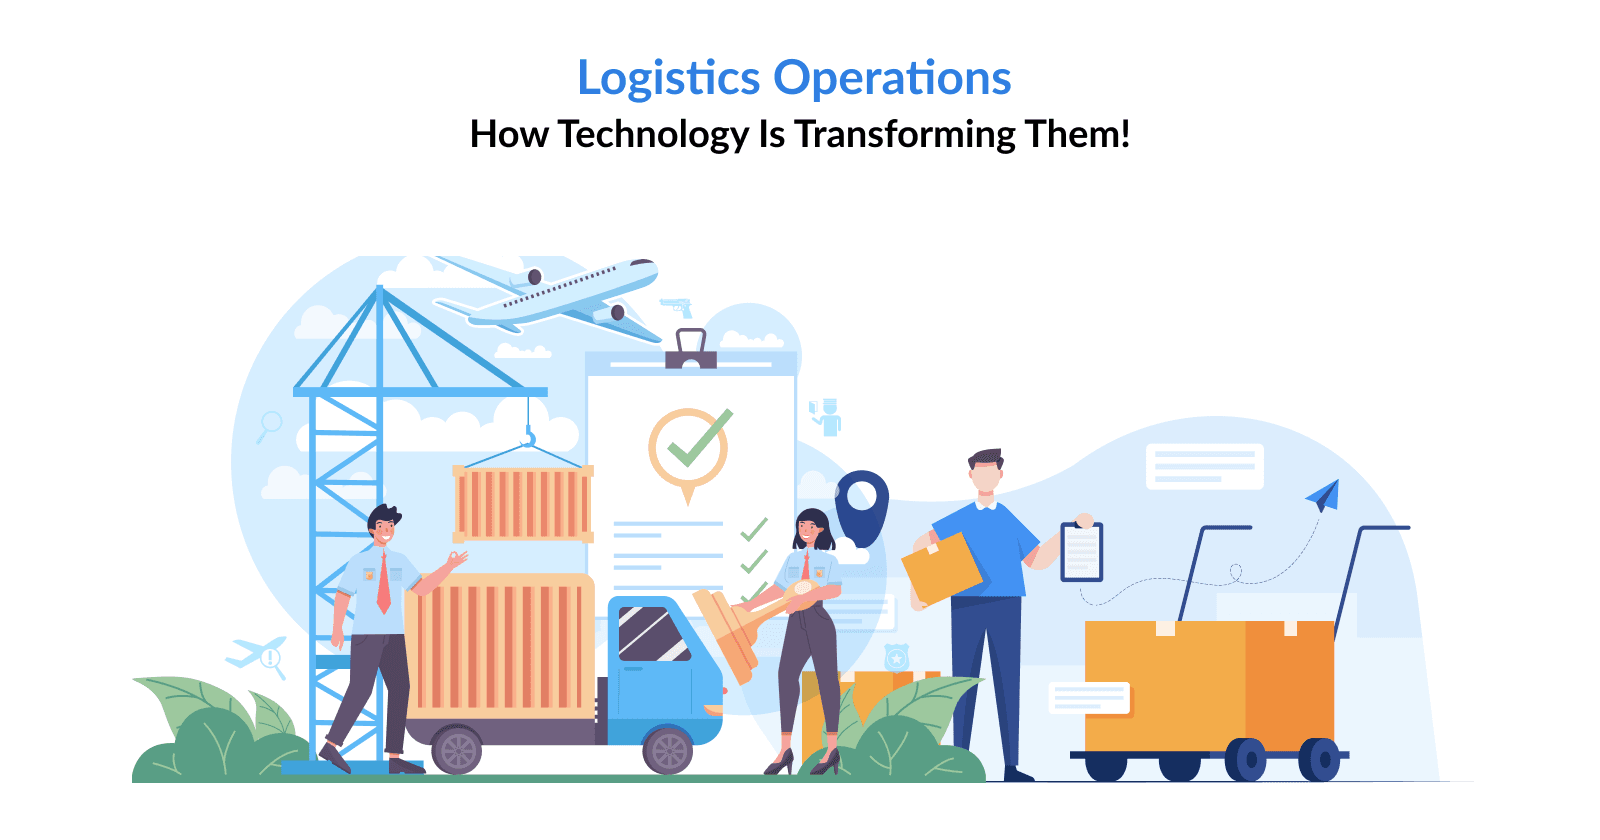 Logistics Operations: How Technology is Transforming Them!